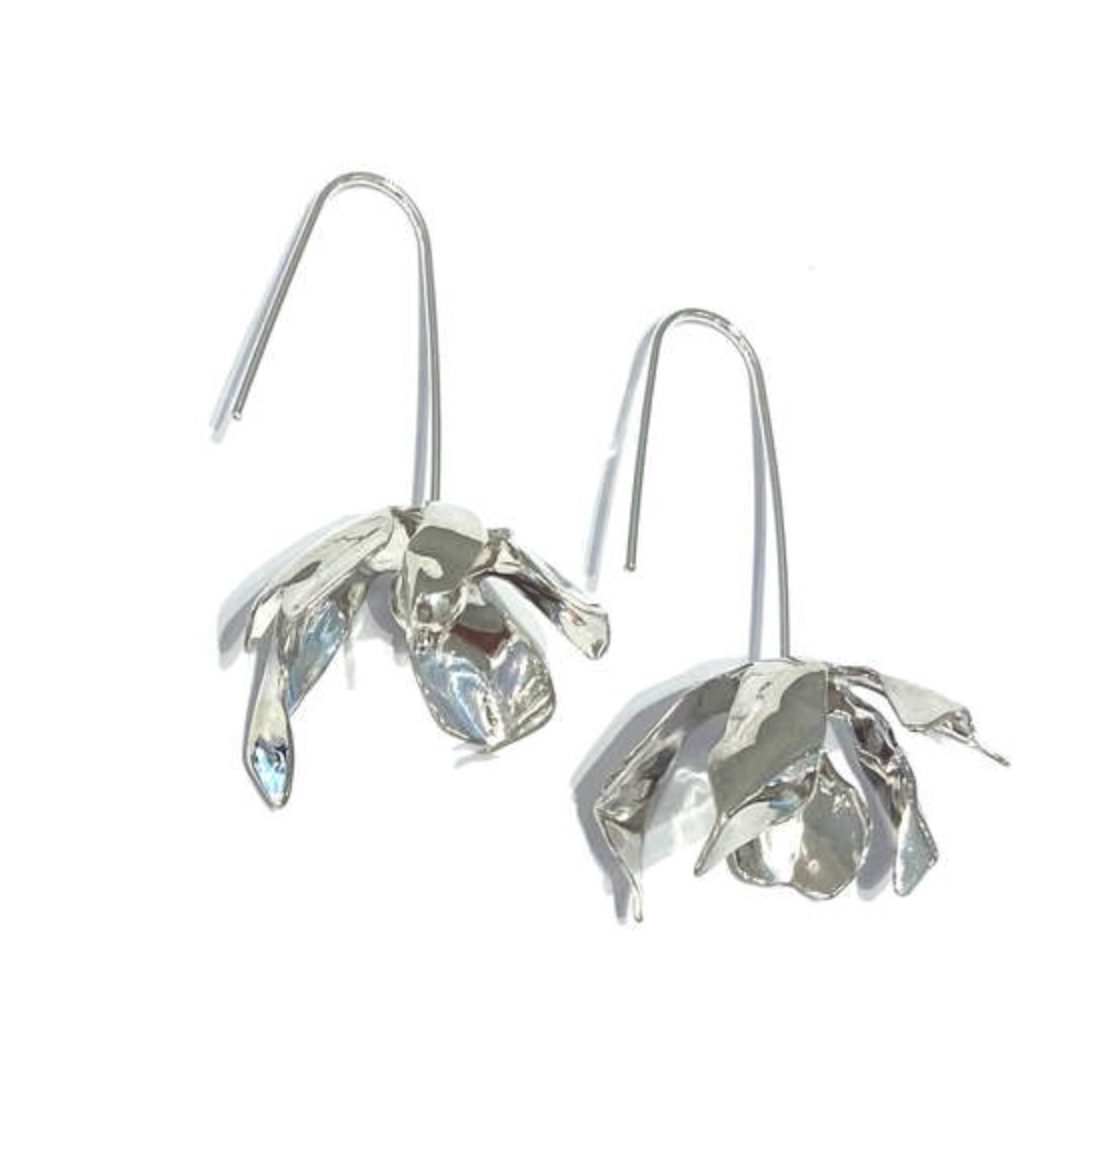 Product Image for Marley Earrings, Sterling Silver